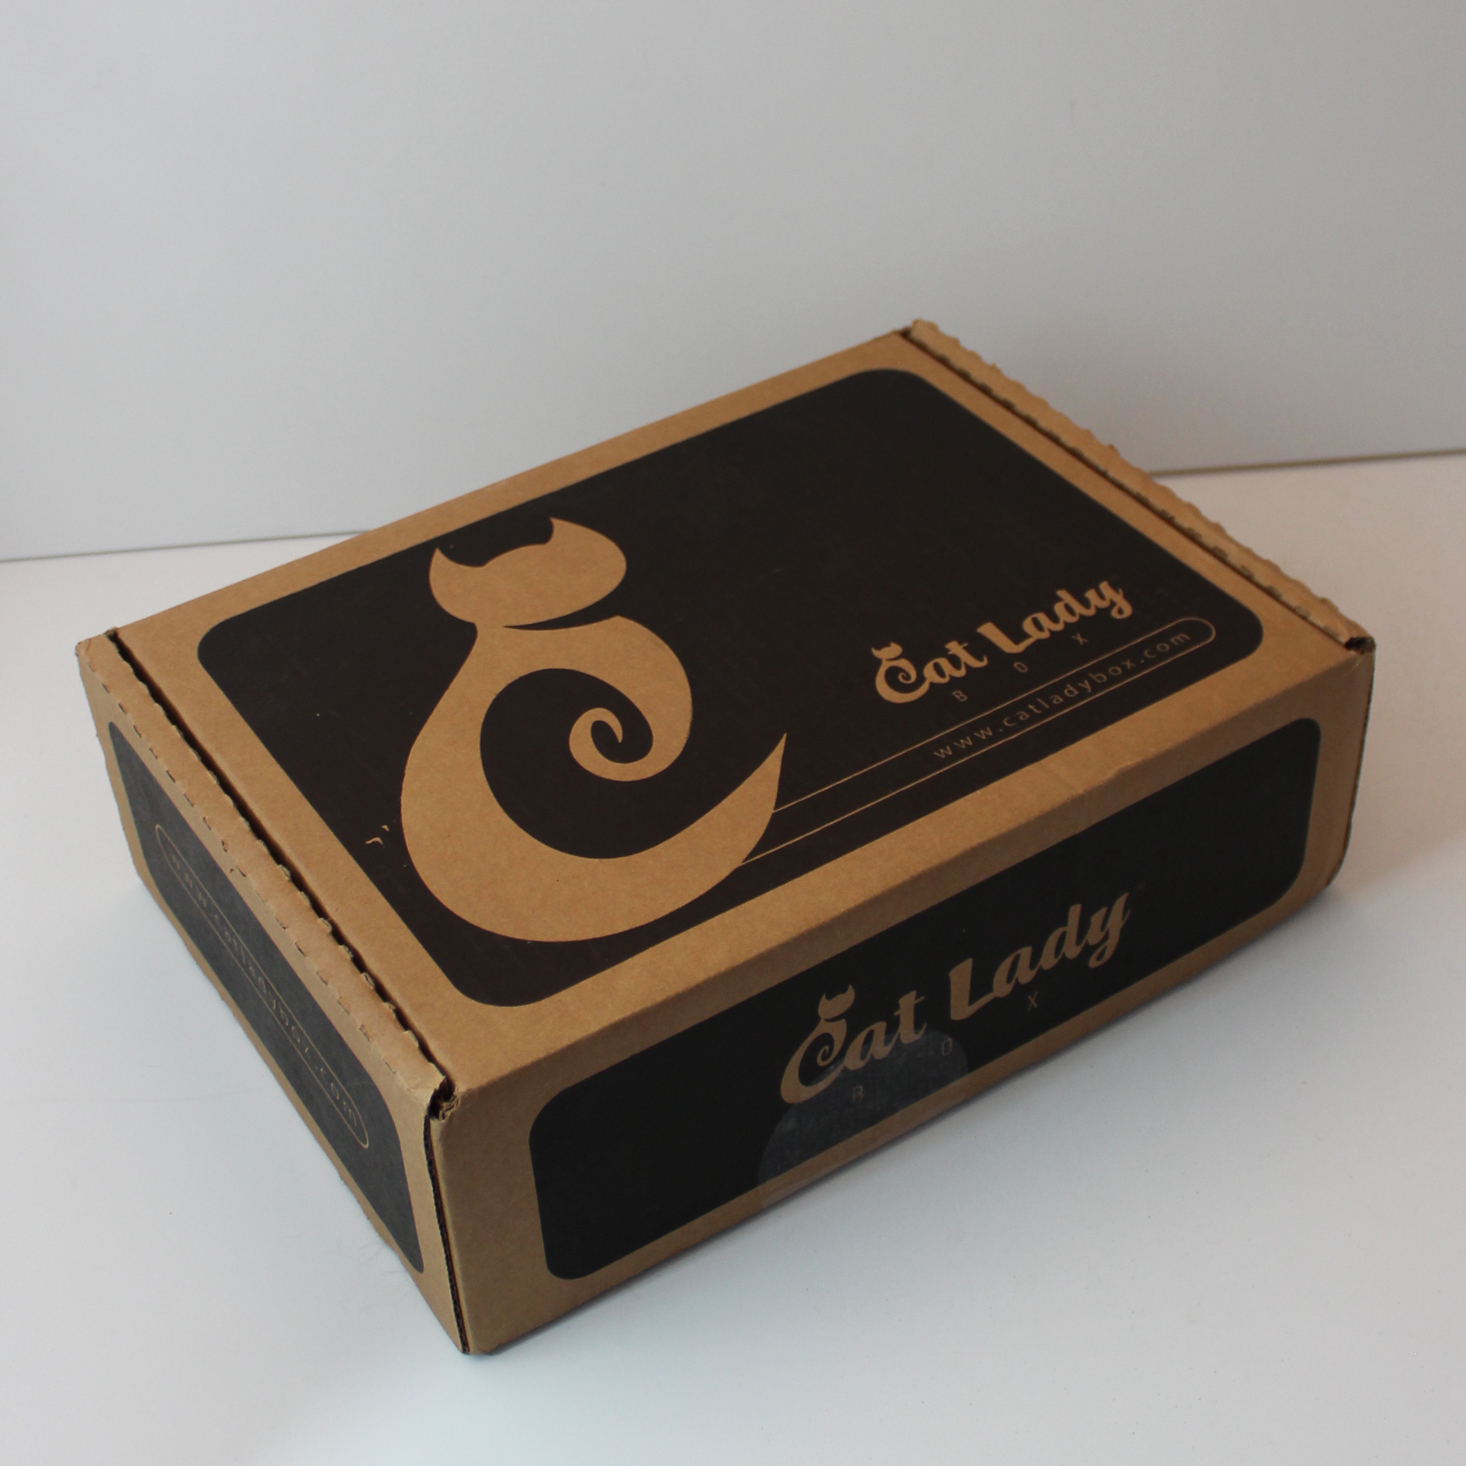 CatLadyBox “Spring Time” Subscription Review – March 2021